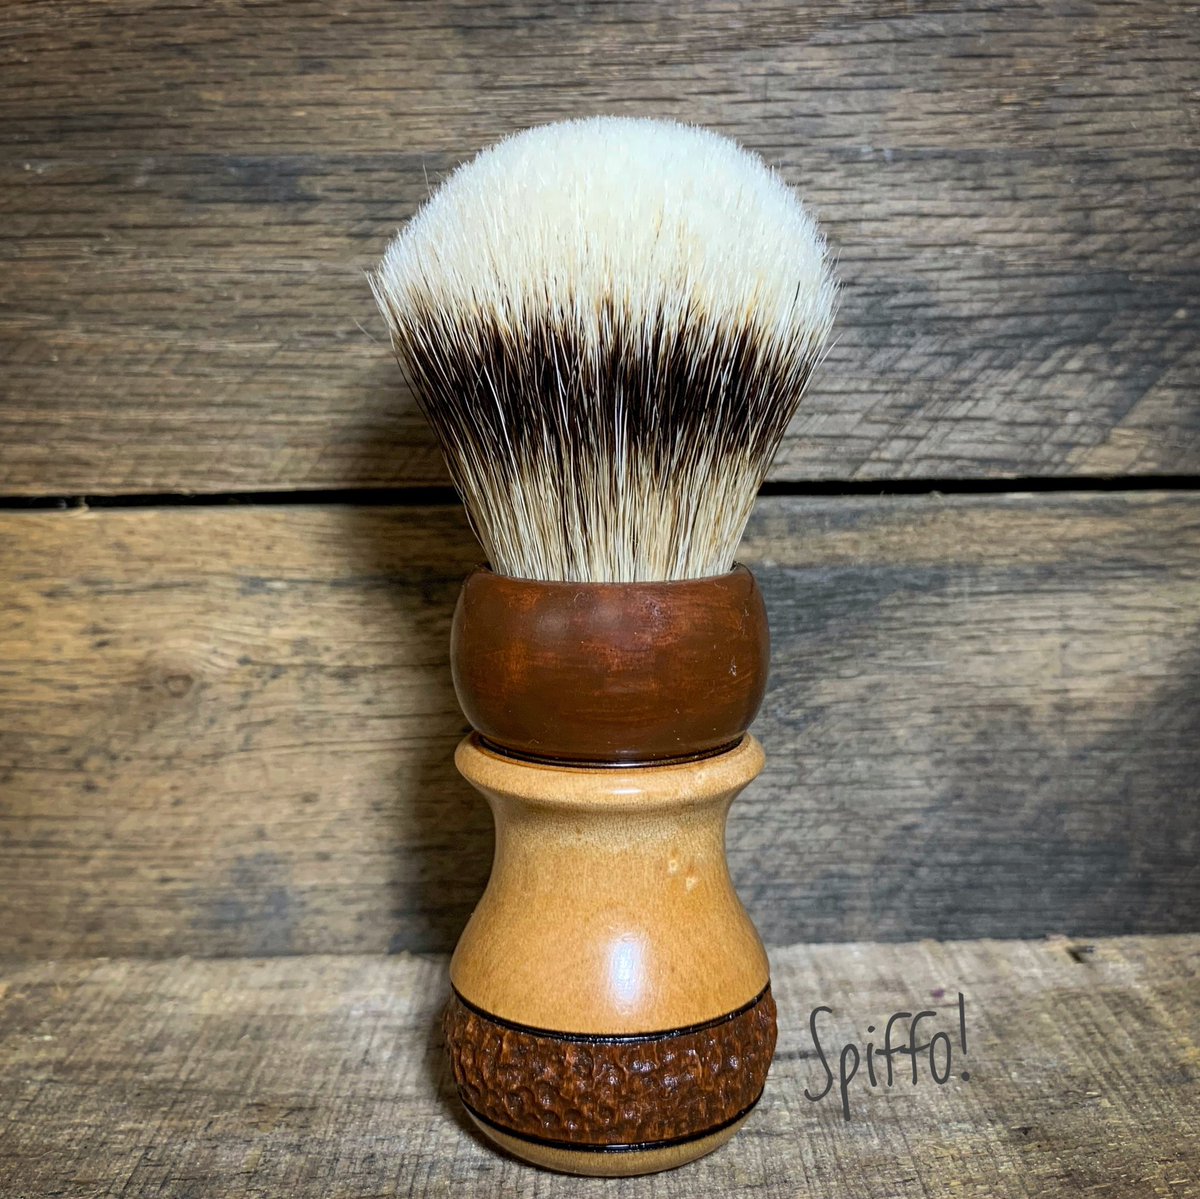 Seger is made of wood from the majestic Maple tree and with its contrasting coloured knurled band and ferrule it is definitely a looker! #shavingbrush #shavebrush #spiffo #spiffoman #shaveoftheday #shaving #shavingbrushes #wetshaving #madeinhalifax #halifax #halifaxns #novascotia